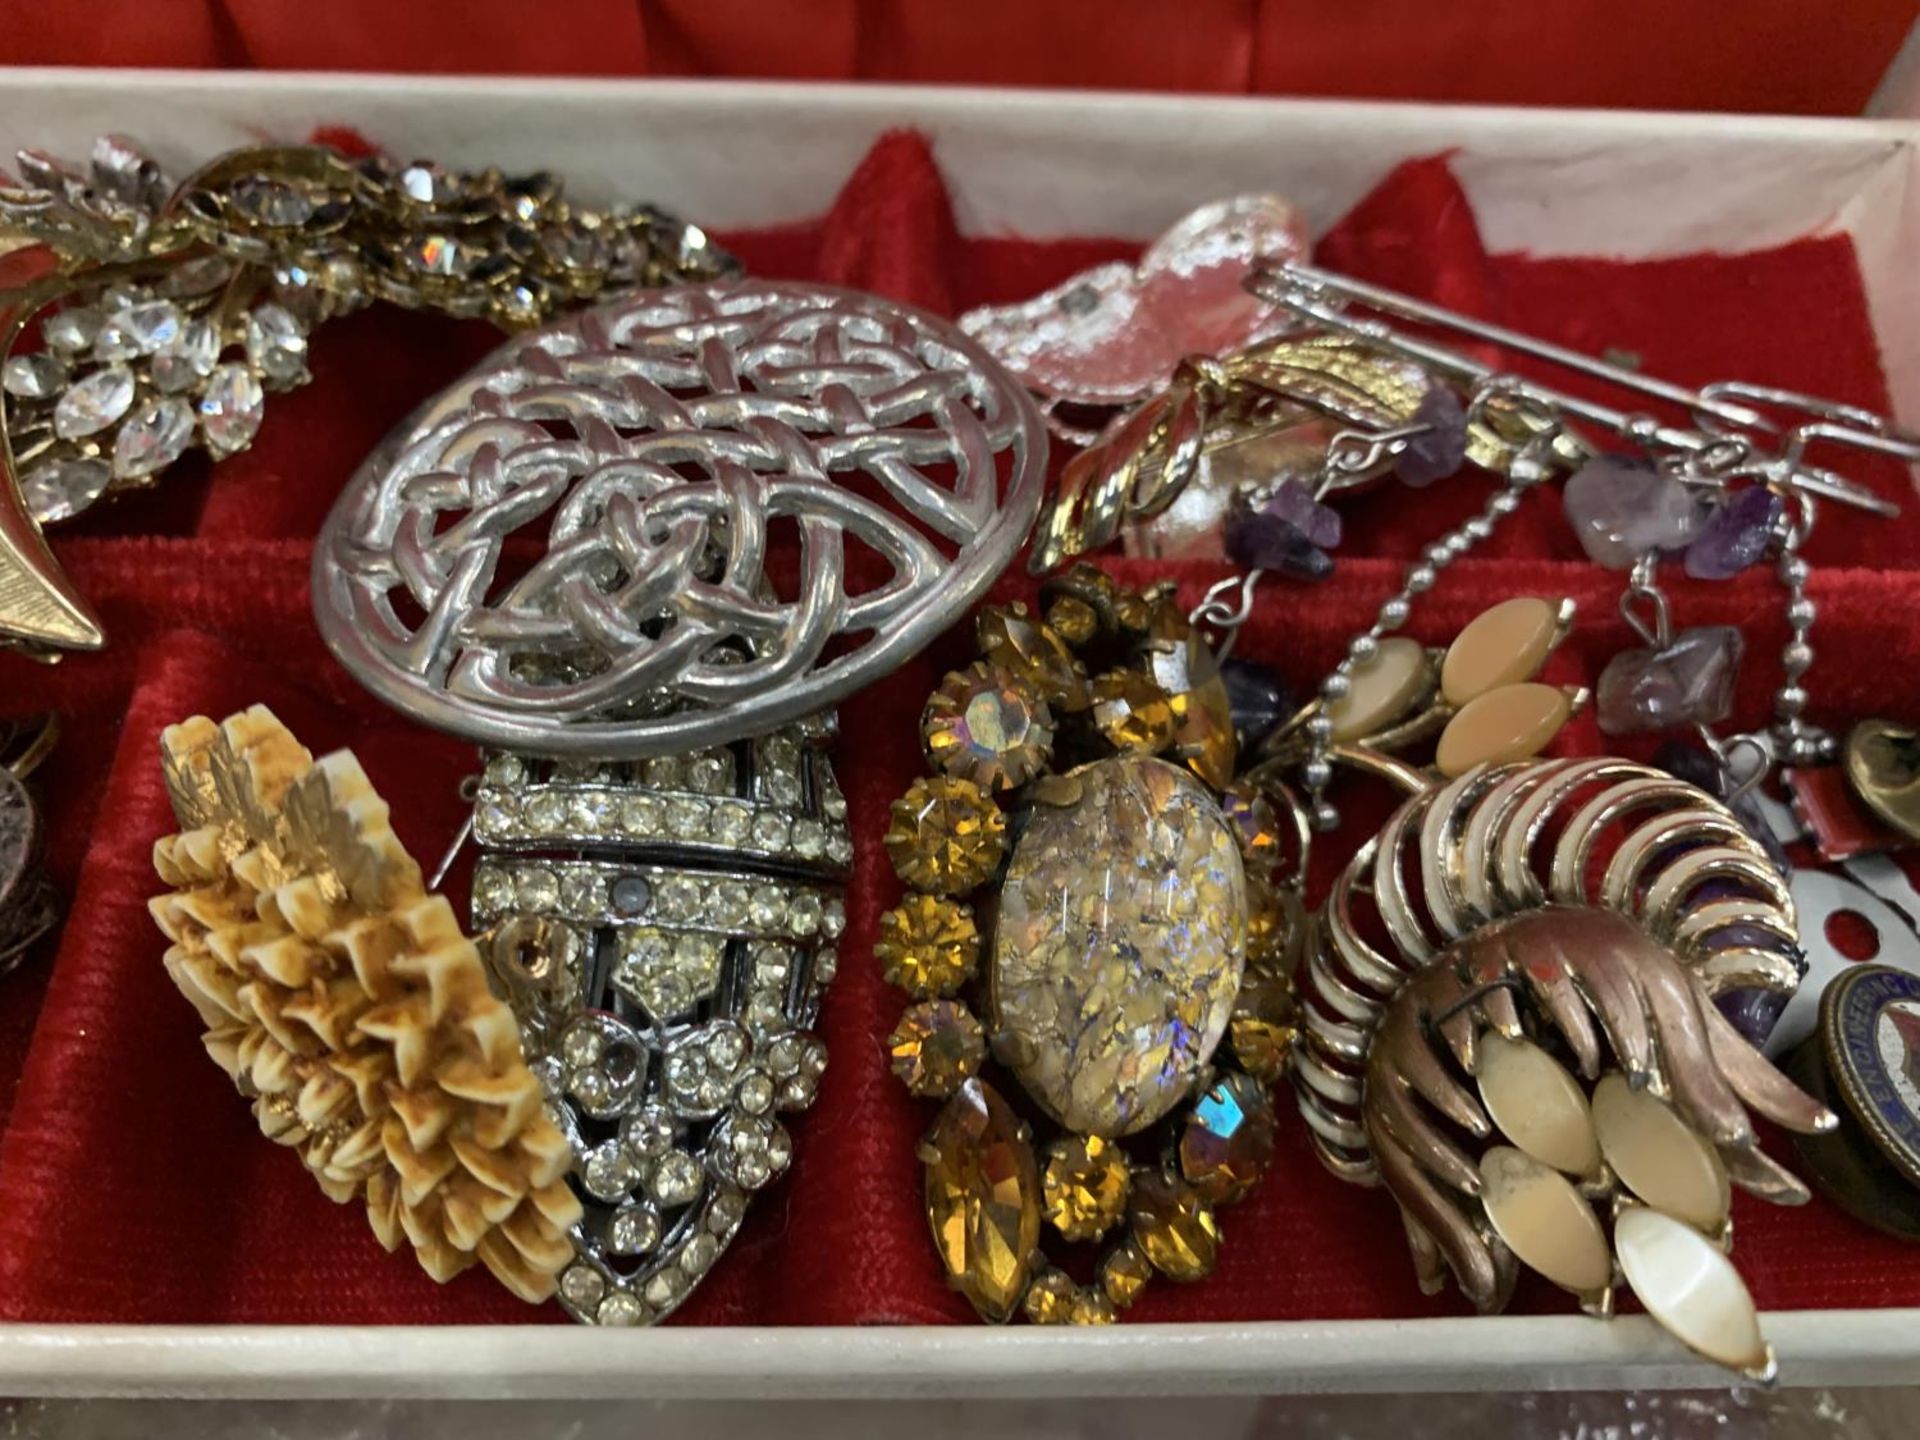 A QUANTITY OF COSTUME JEWELLERY TO INCLUDE BROOCHES, EARRINGS, WATCHES, NECKLACES, BADGES, ETC - Image 3 of 5